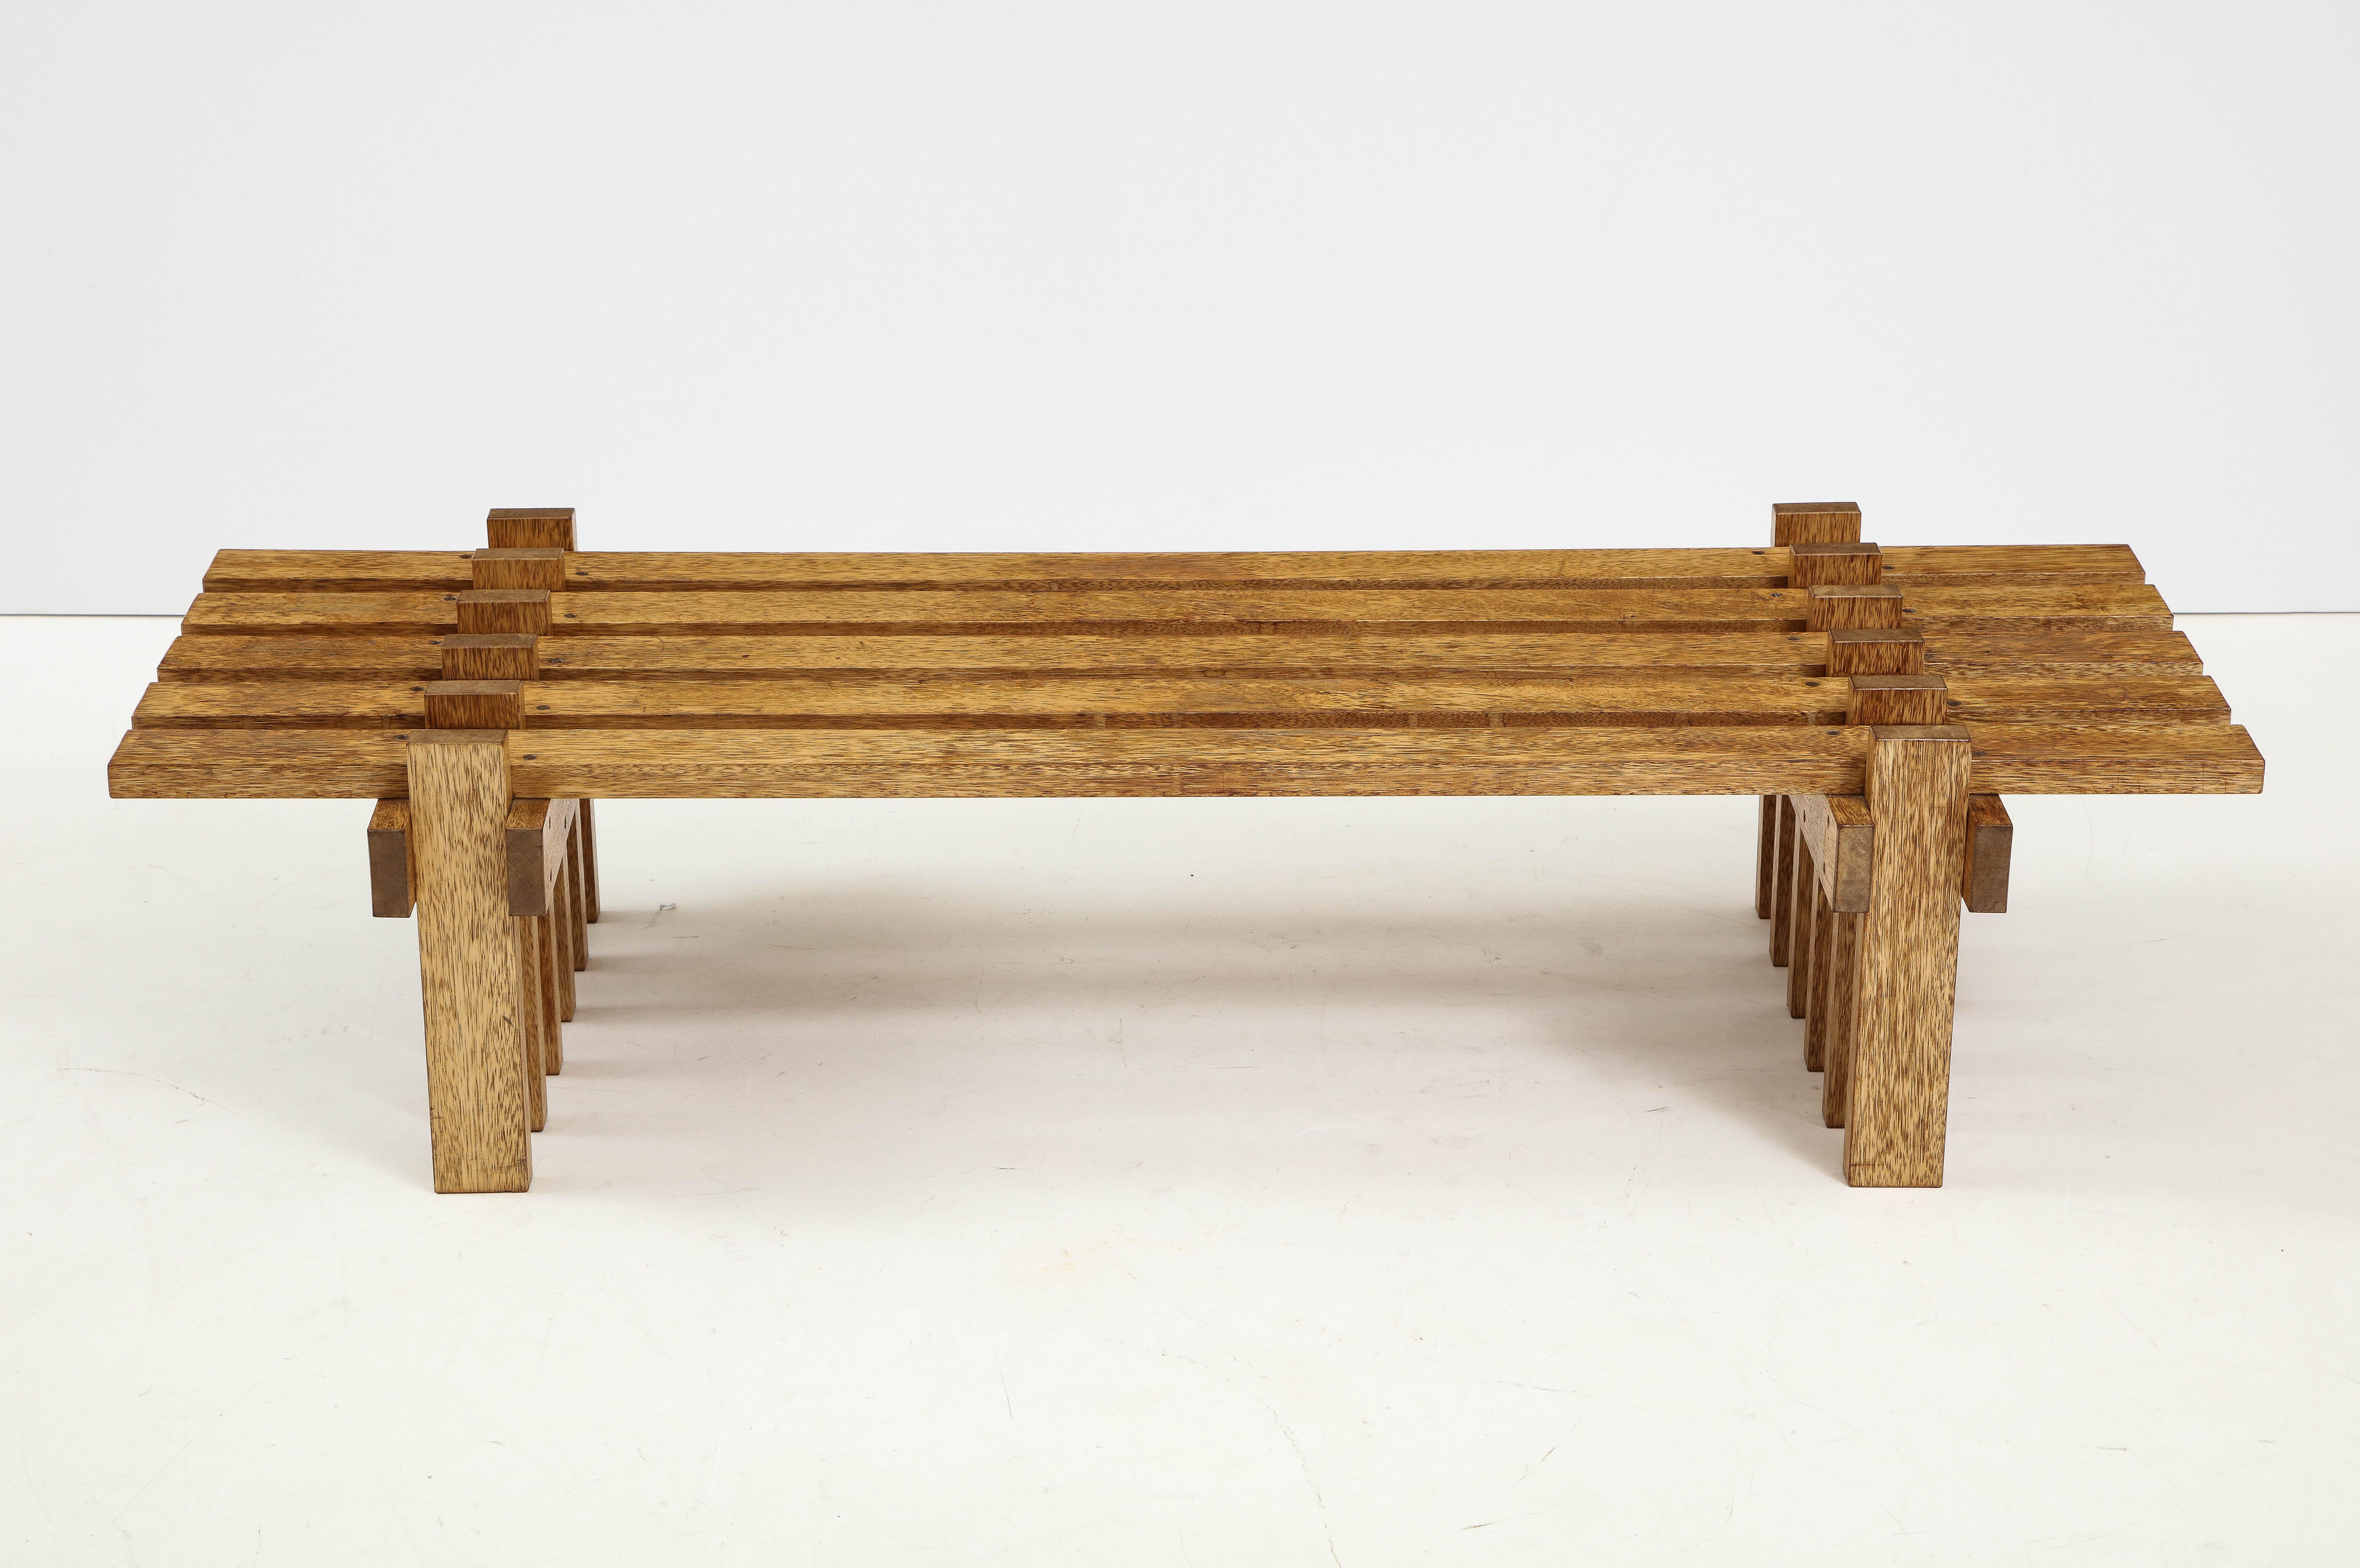 Dutch Unique Design by Amsterdam Architect, Coffee Table\Bench, Netherlands, c. 1960